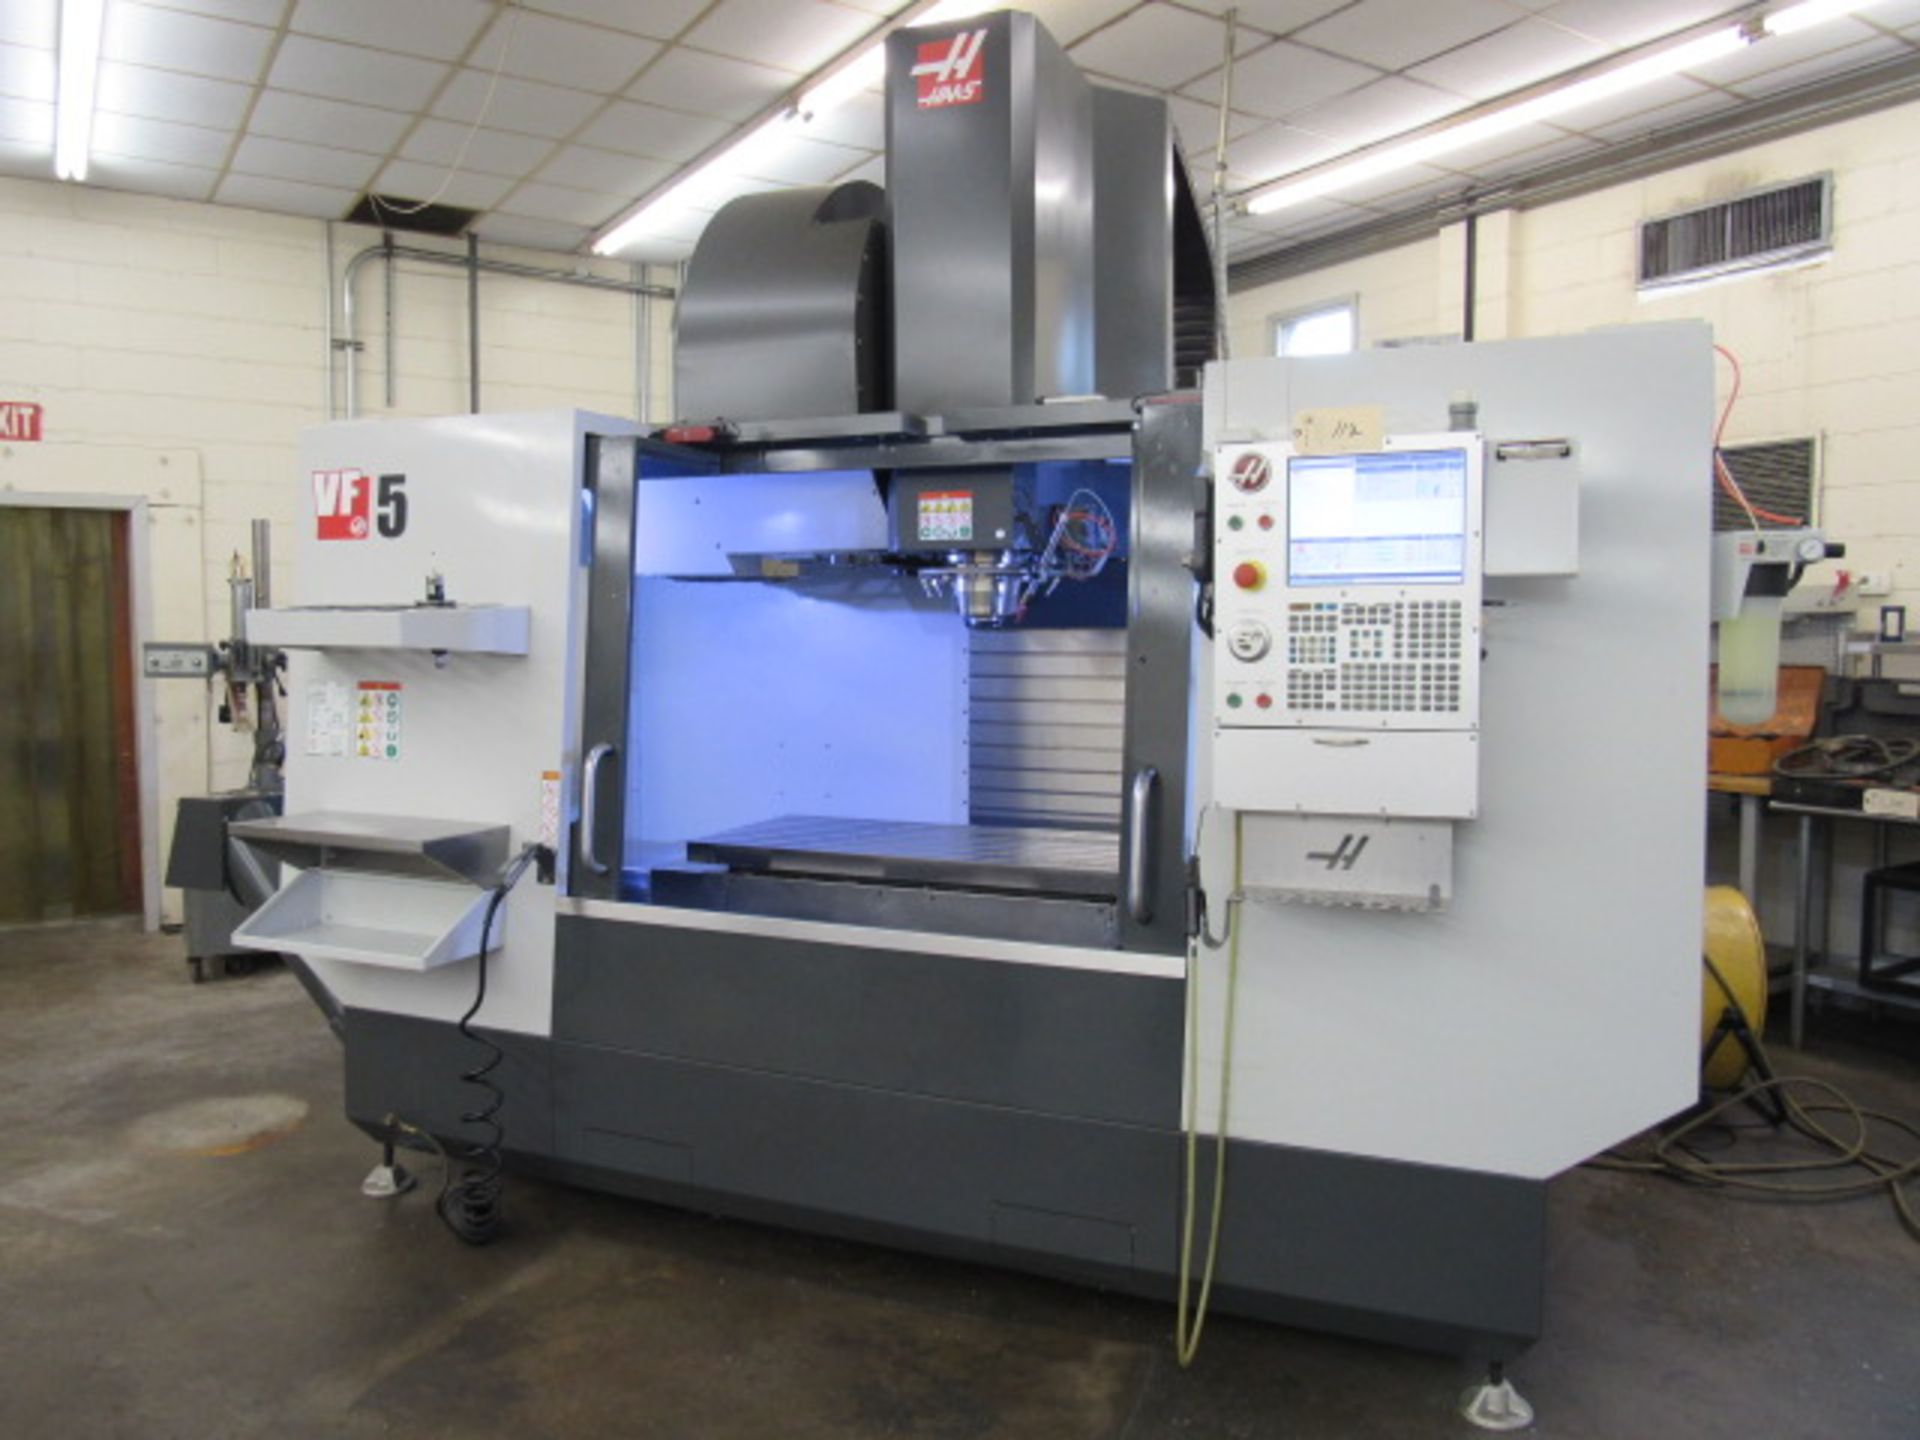 2018 HAAS VF-5/50 CNC Vertical Machining Center - Image 7 of 10